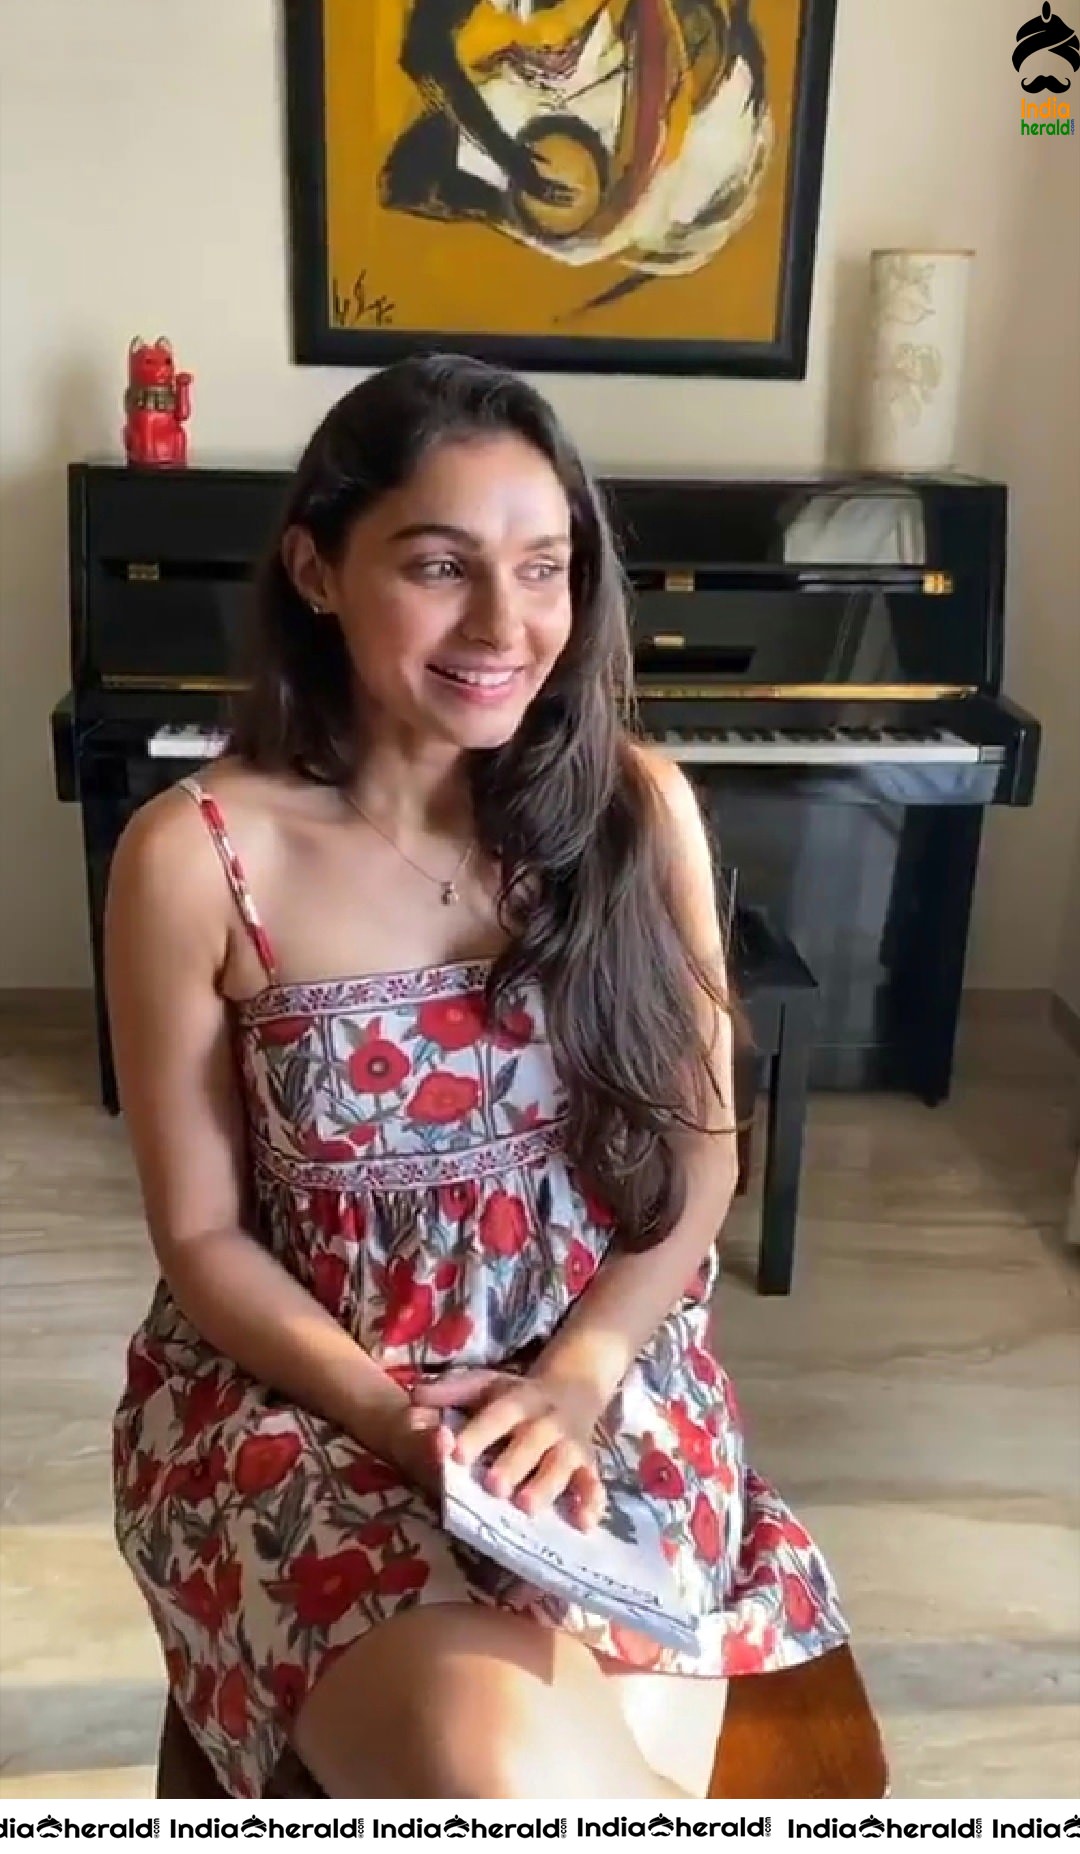 Andrea Jeremiah Live poetry reading session in a Hot Sleeveless Frock Photos